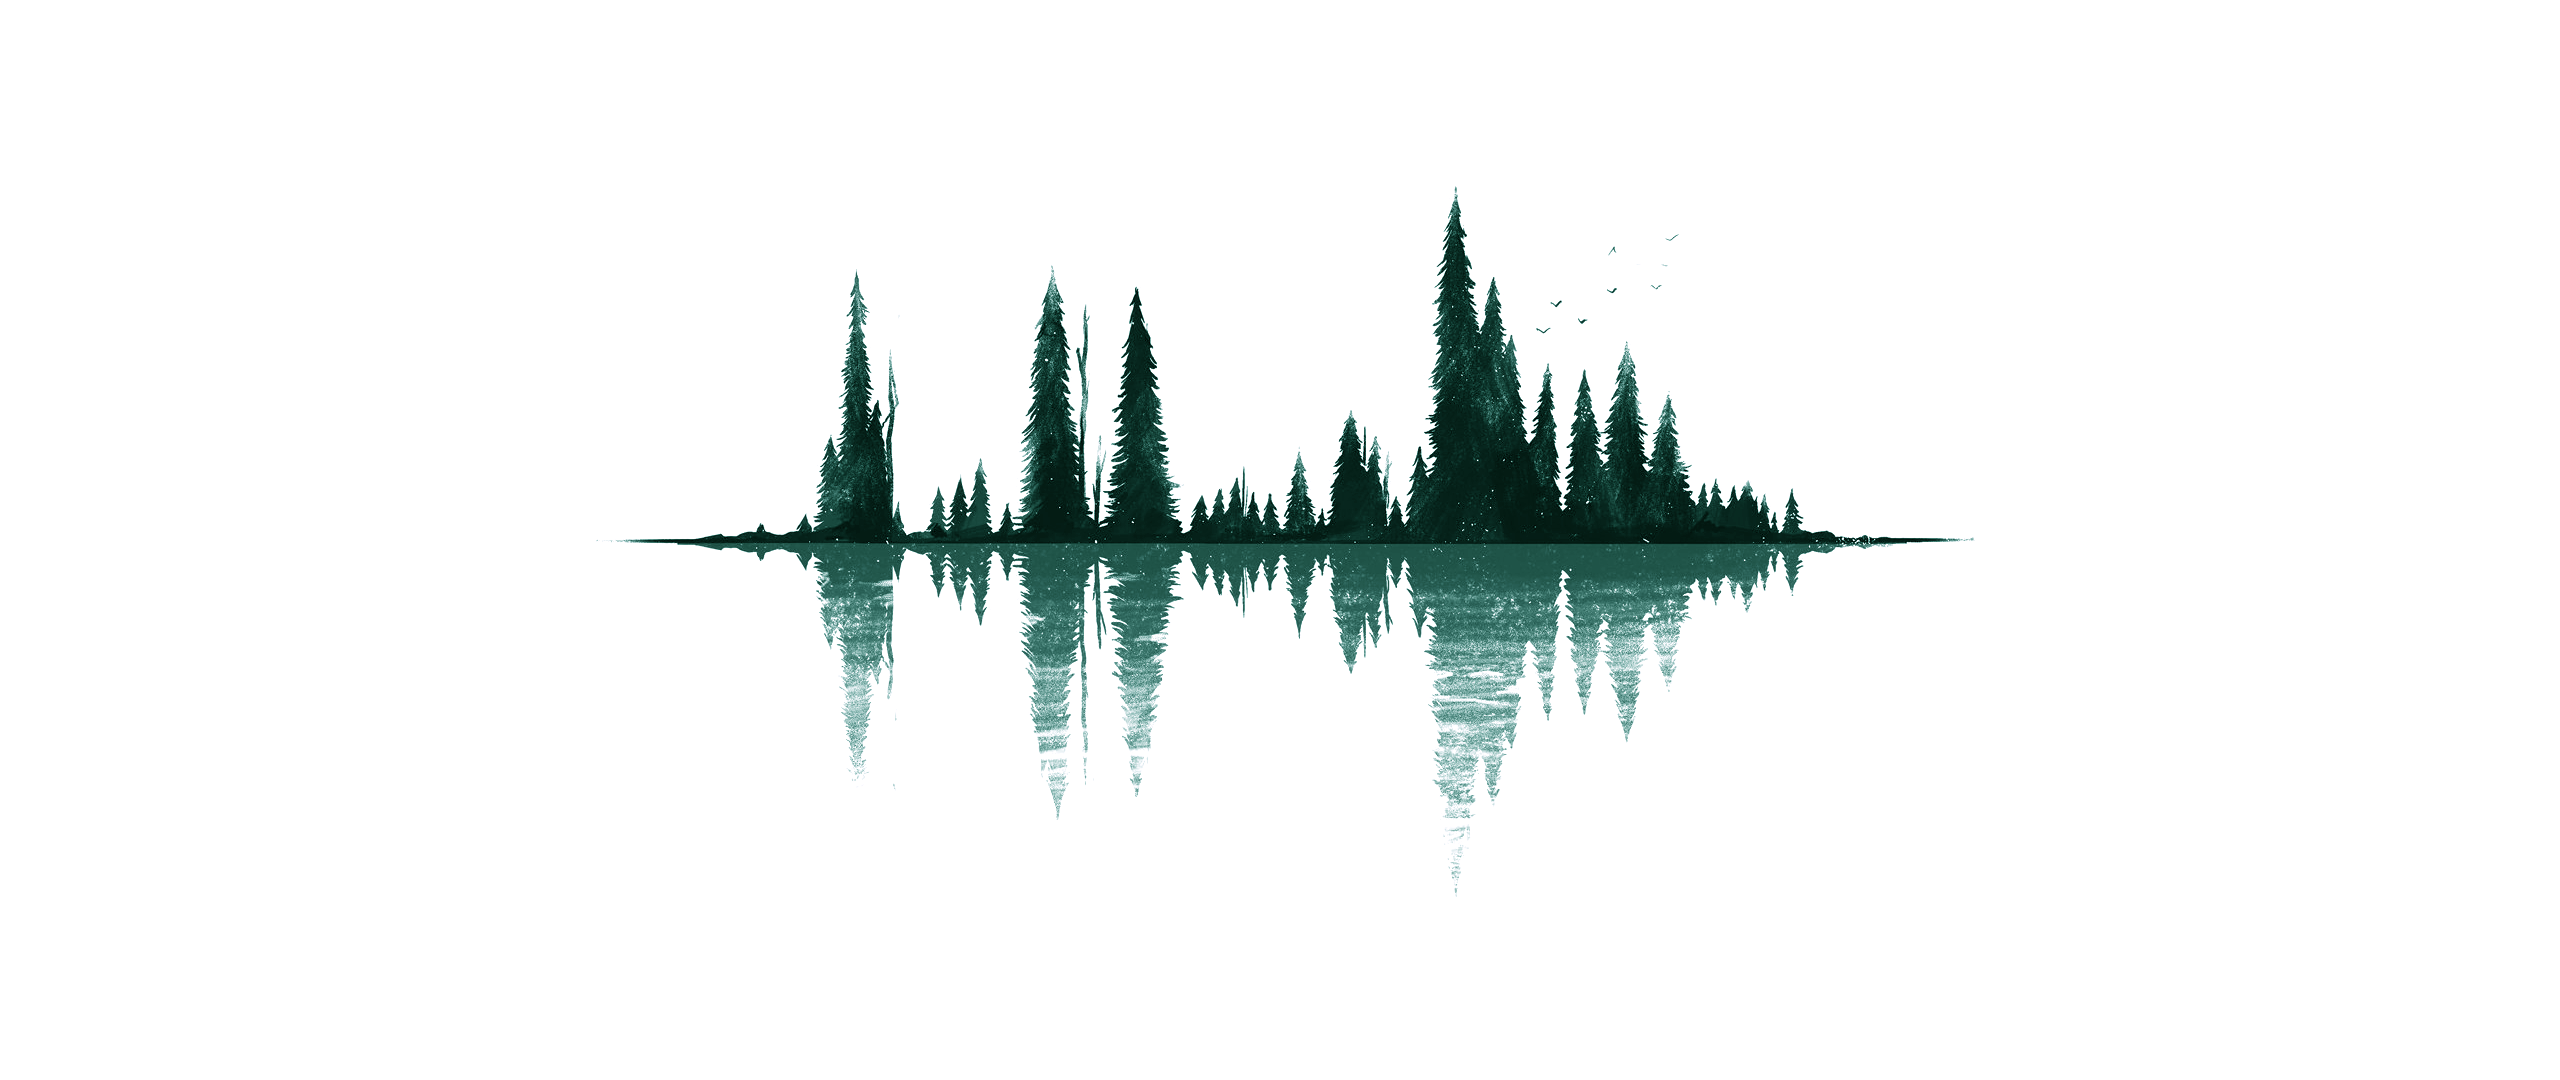 General 2560x1080 ultrawide minimalism artwork reflection trees simple background